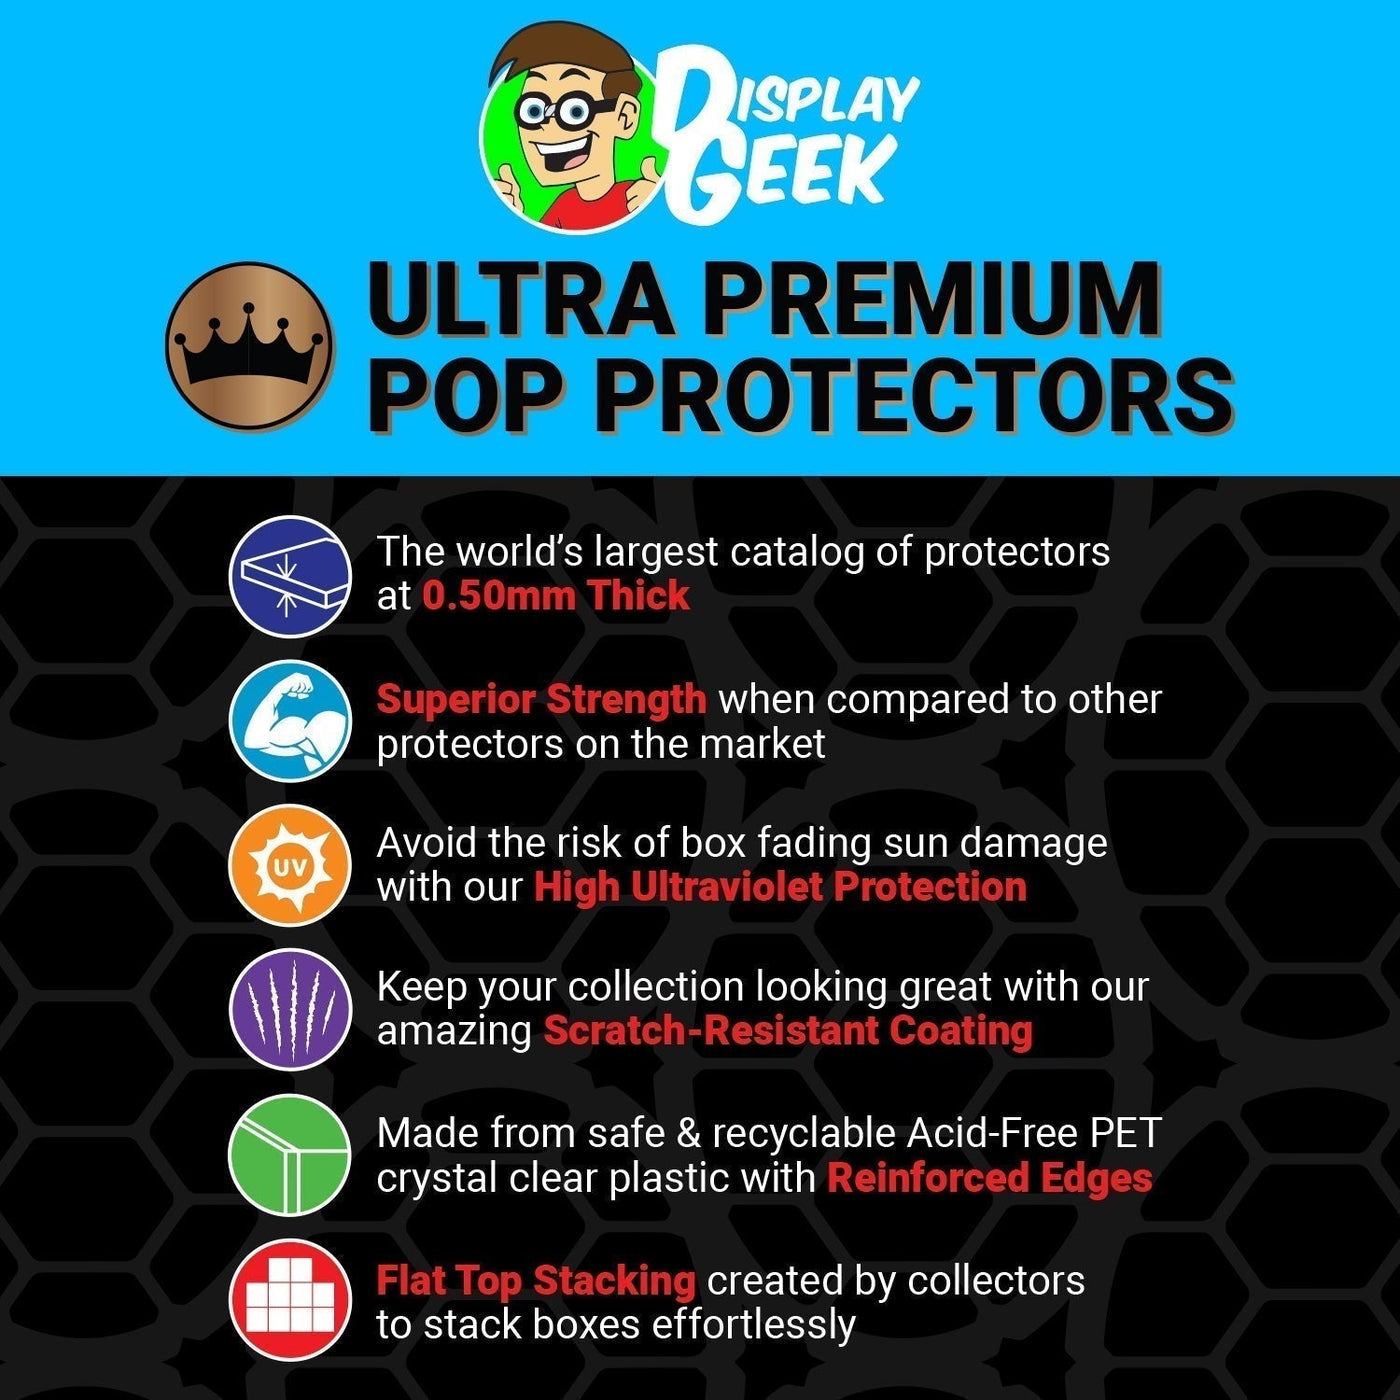 Pop Protector for 10 inch Spider-Man Blacklight #1236 Jumbo Funko Pop on The Protector Guide App by Display Geek